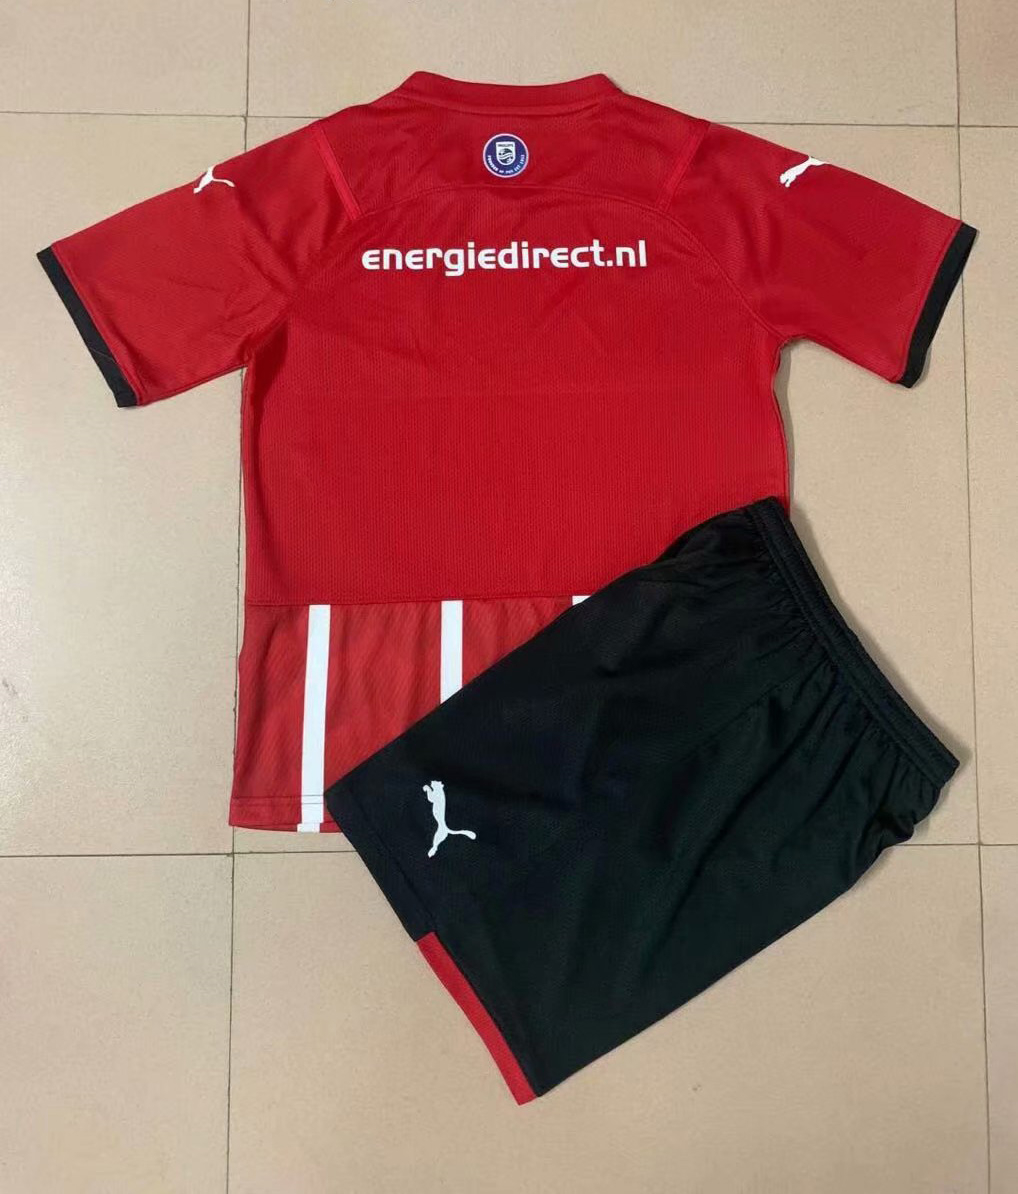 PSV Soccer Jersey + Short Replica Home Youth 2021/22